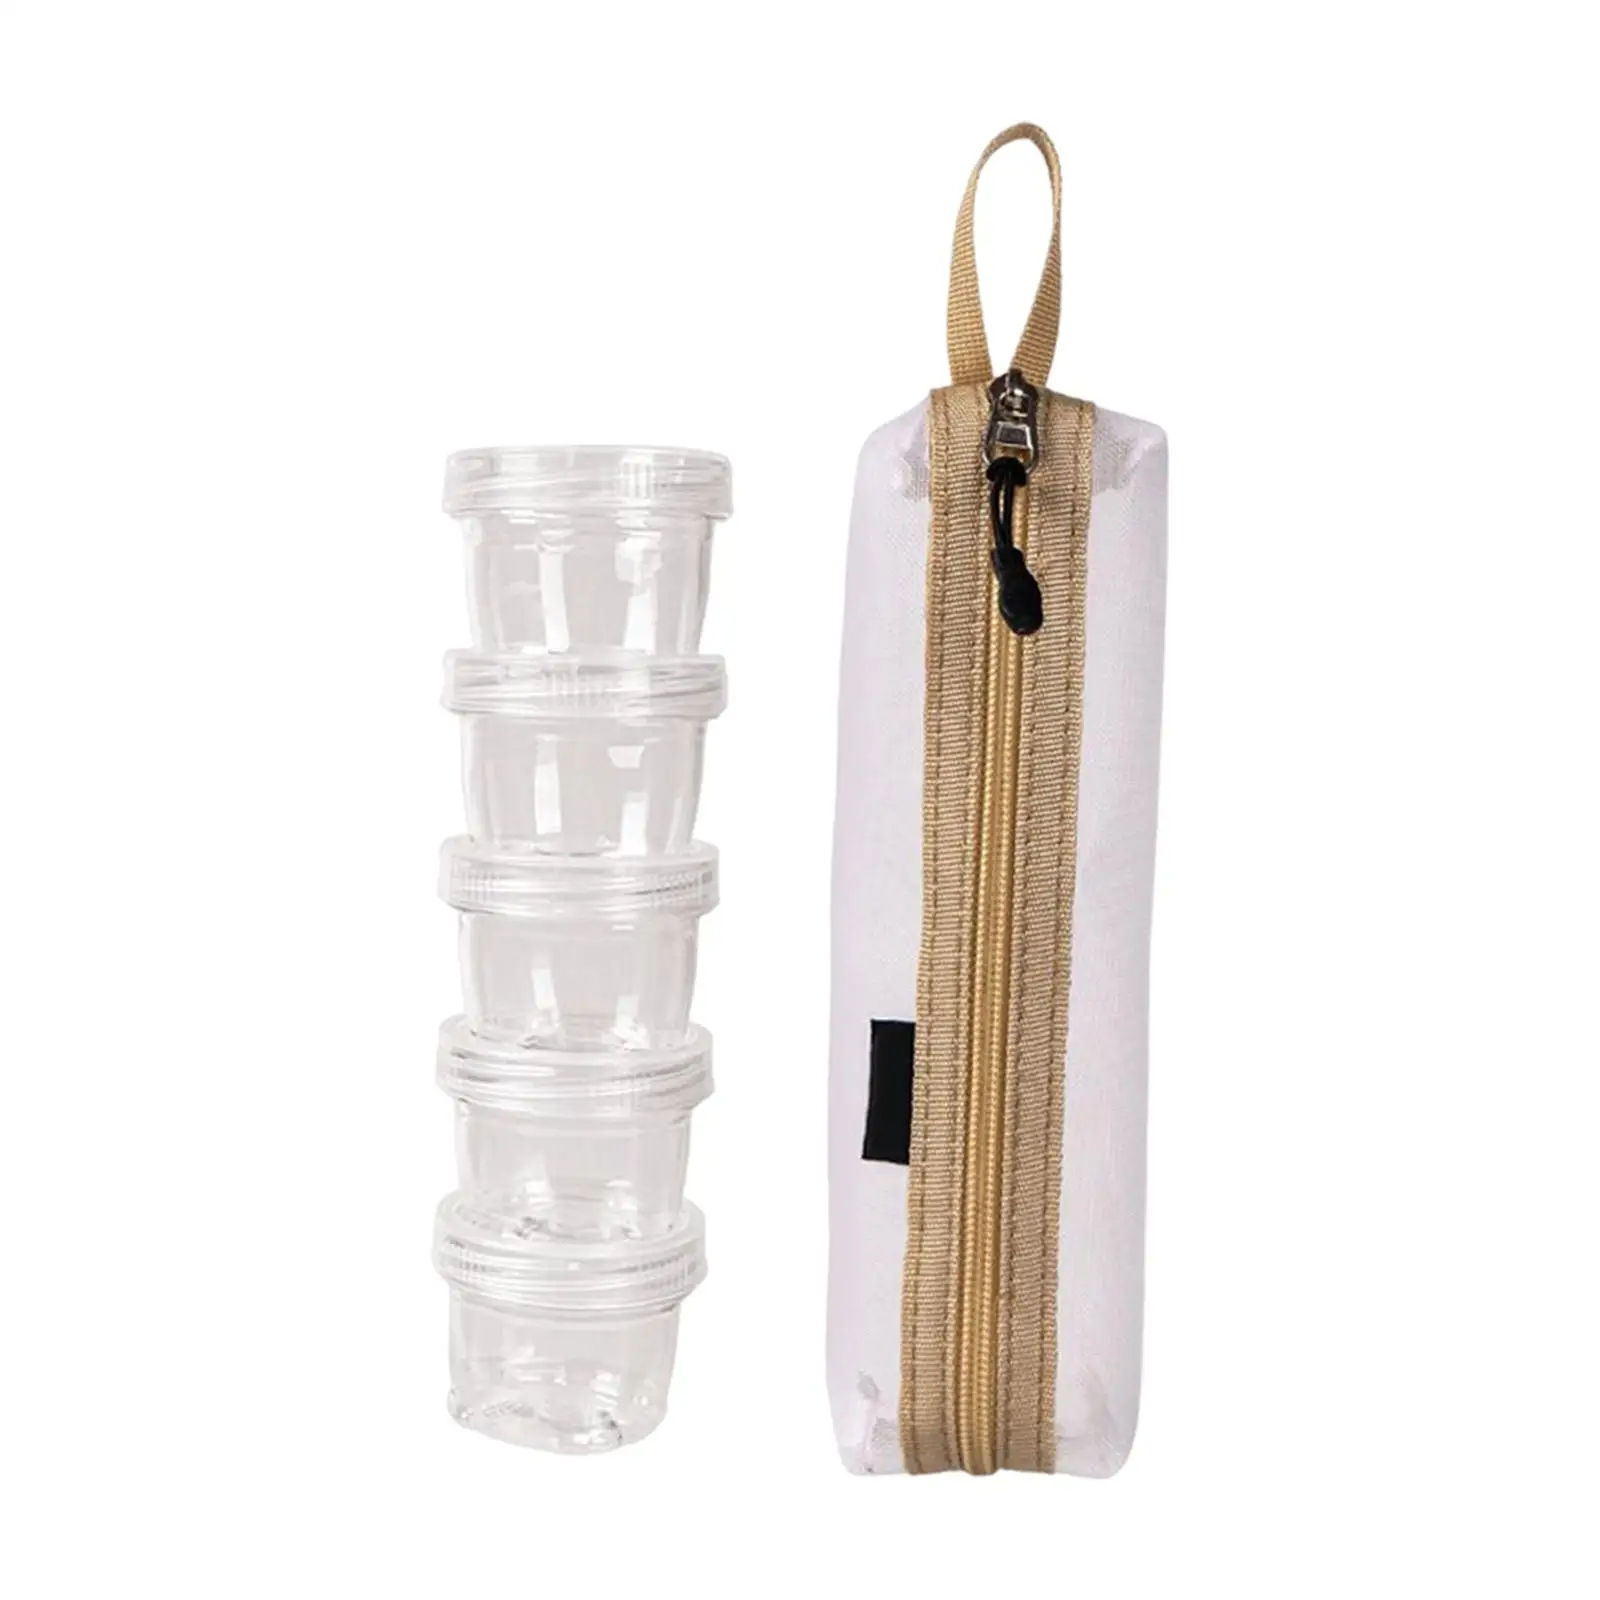 Portable spice bags with 5 spices Jars Seasoning Rack spice with Storage Bag for Picnic